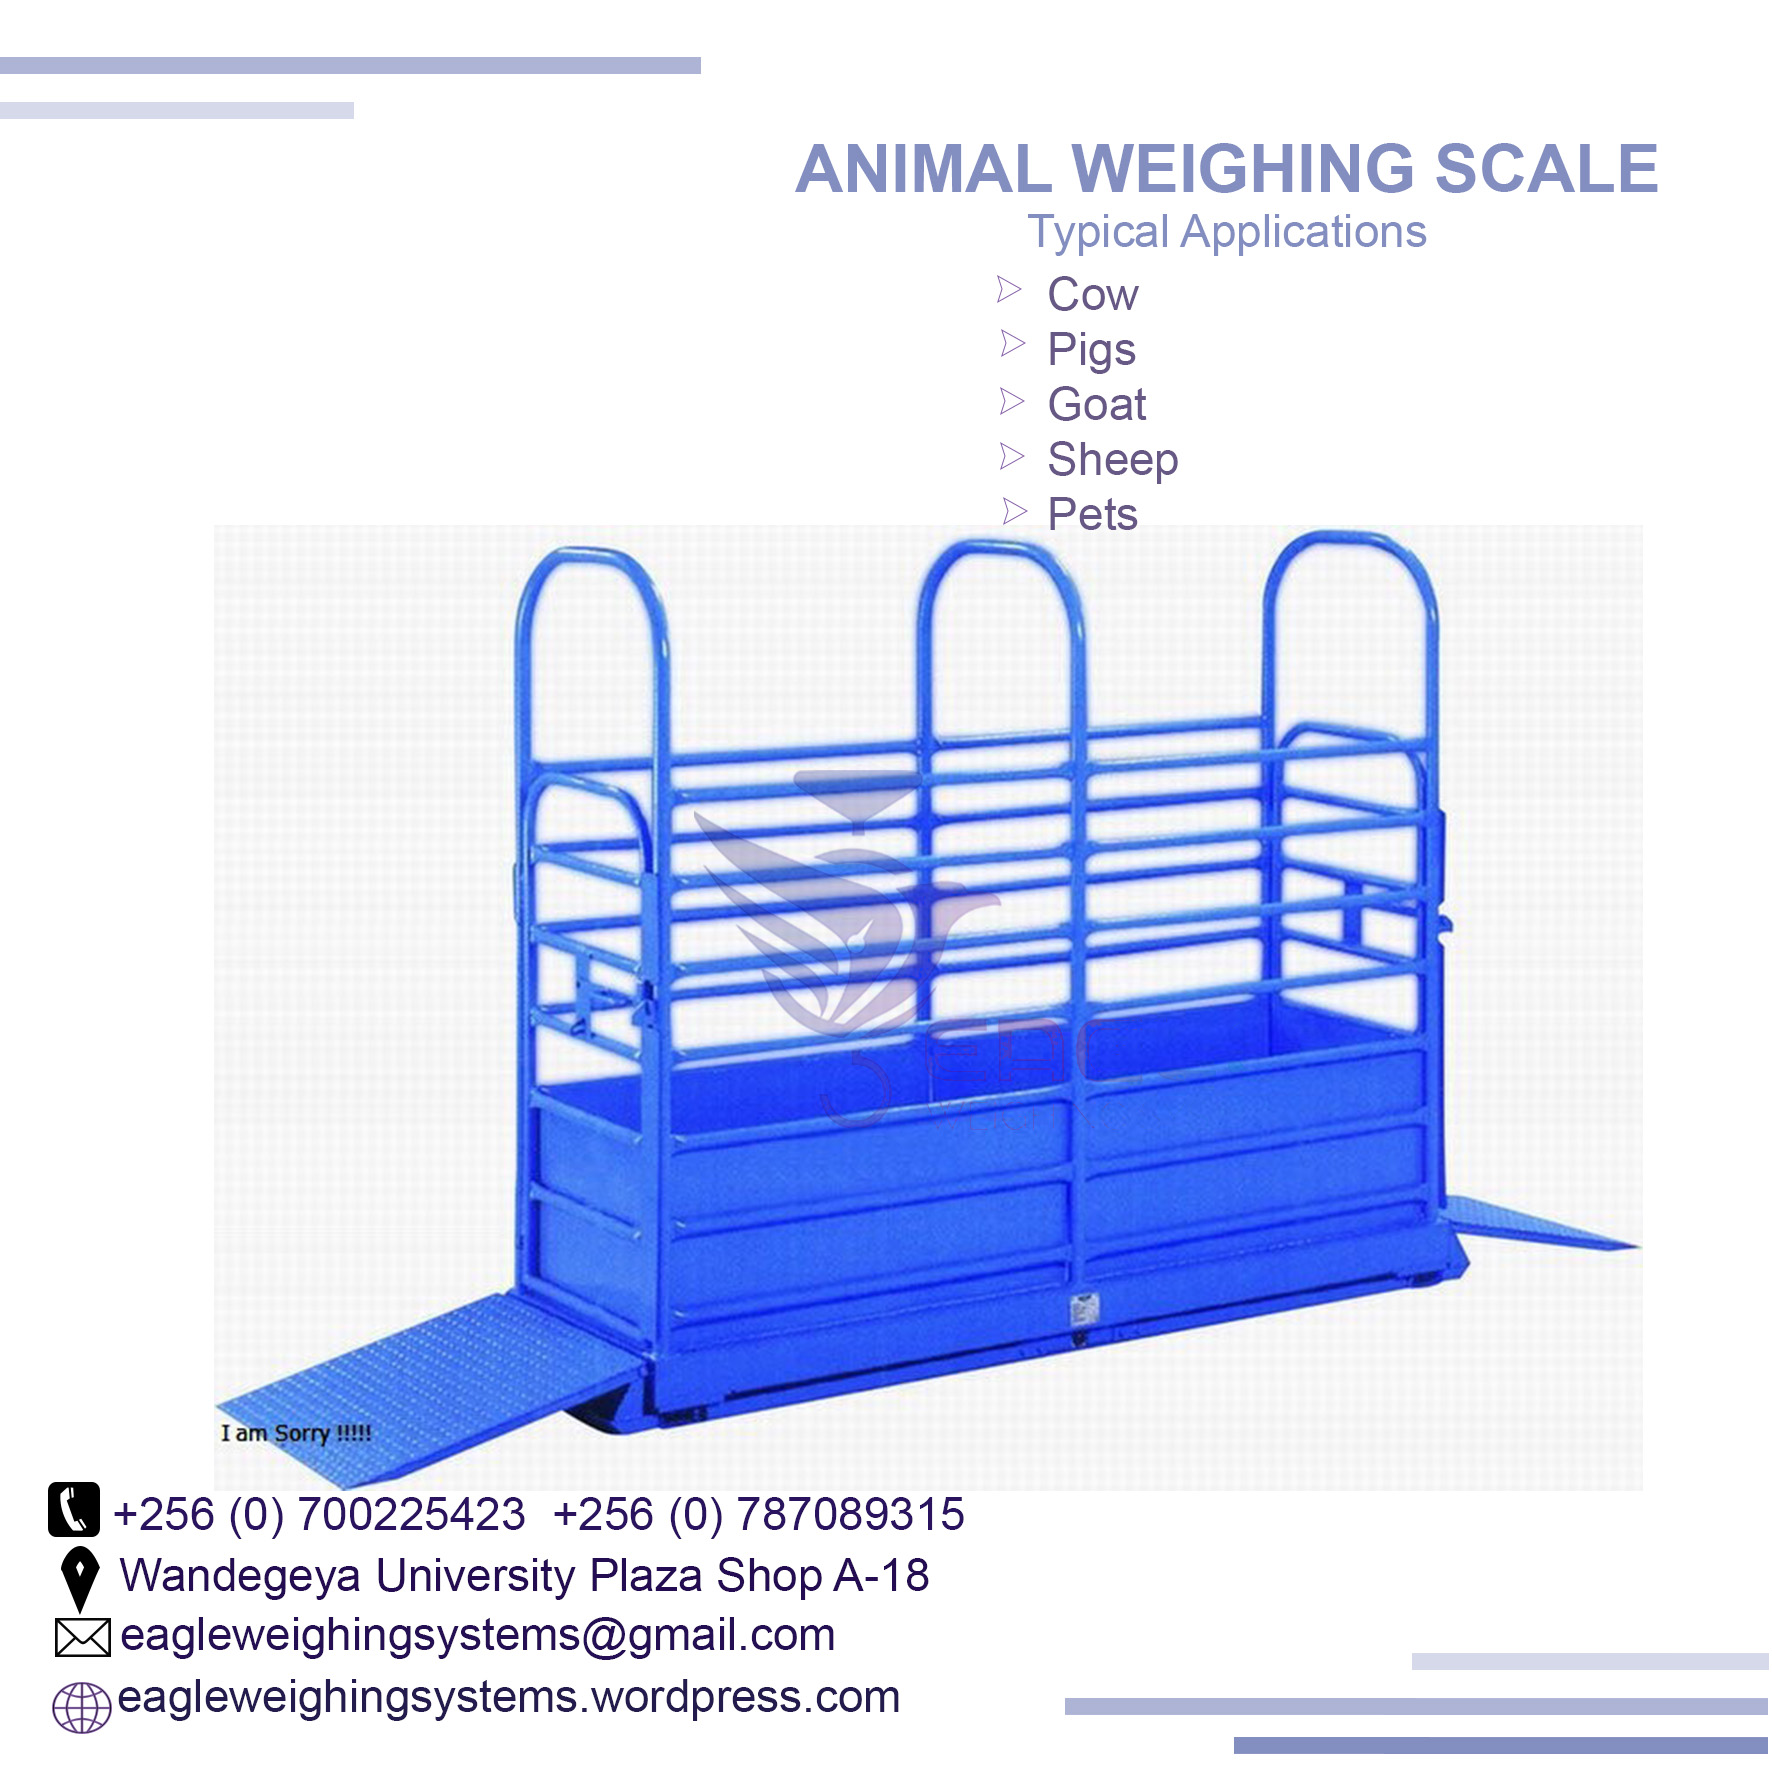 Do you need a cattle weighing scale in Kampala Uganda ?, Kampala Central Division, Central, Uganda